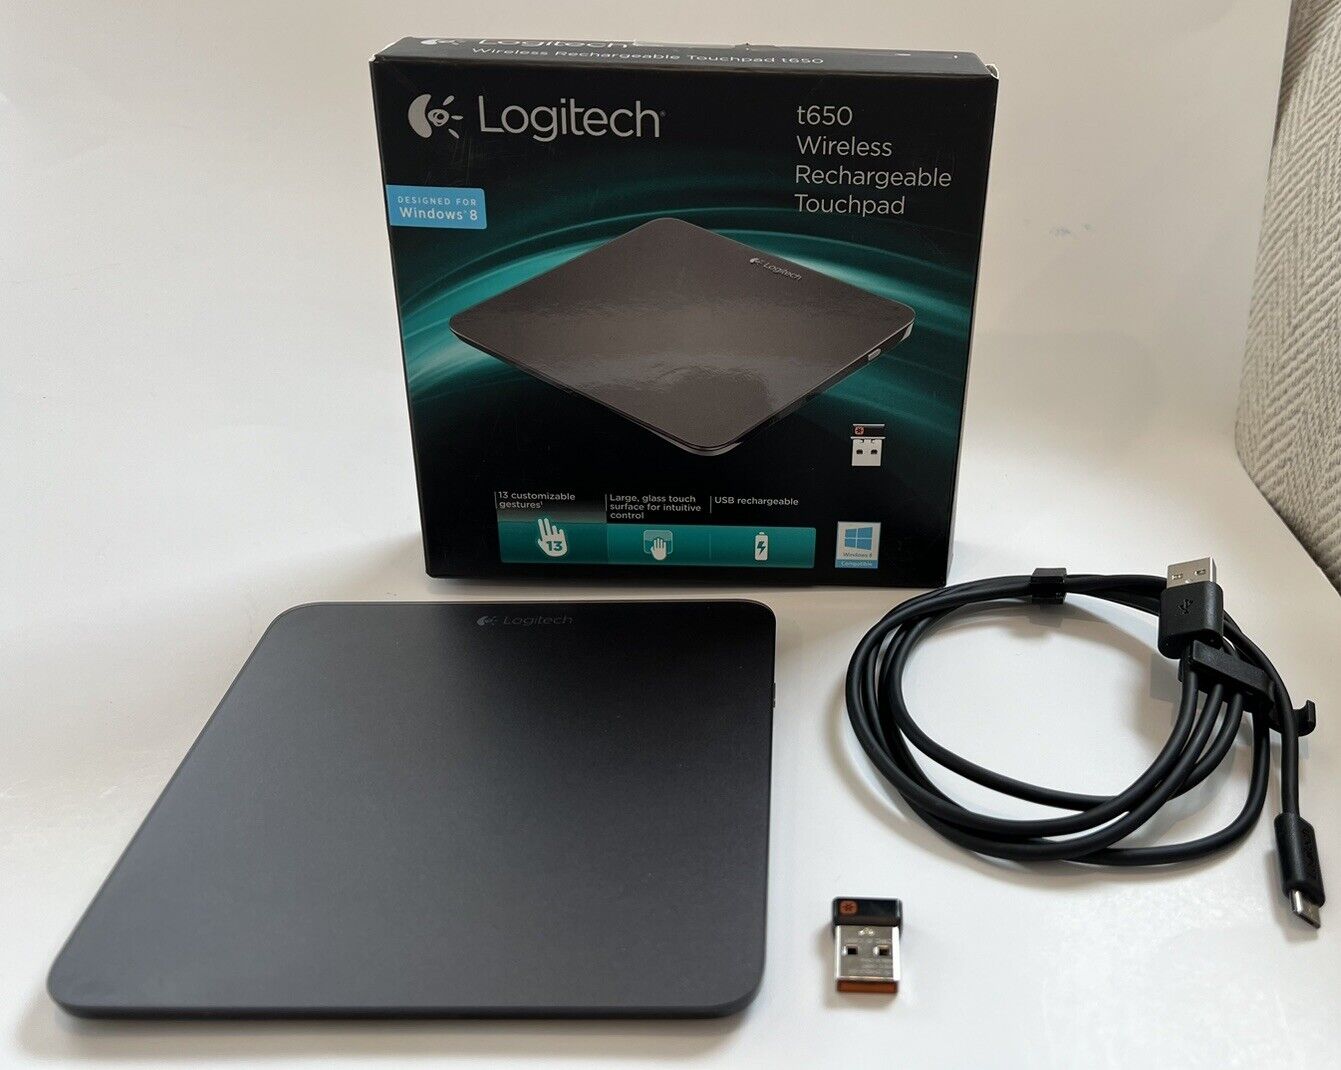 LOGITECH T650 Wireless Rechargeable Touchpad with Unifying Receiver Tested